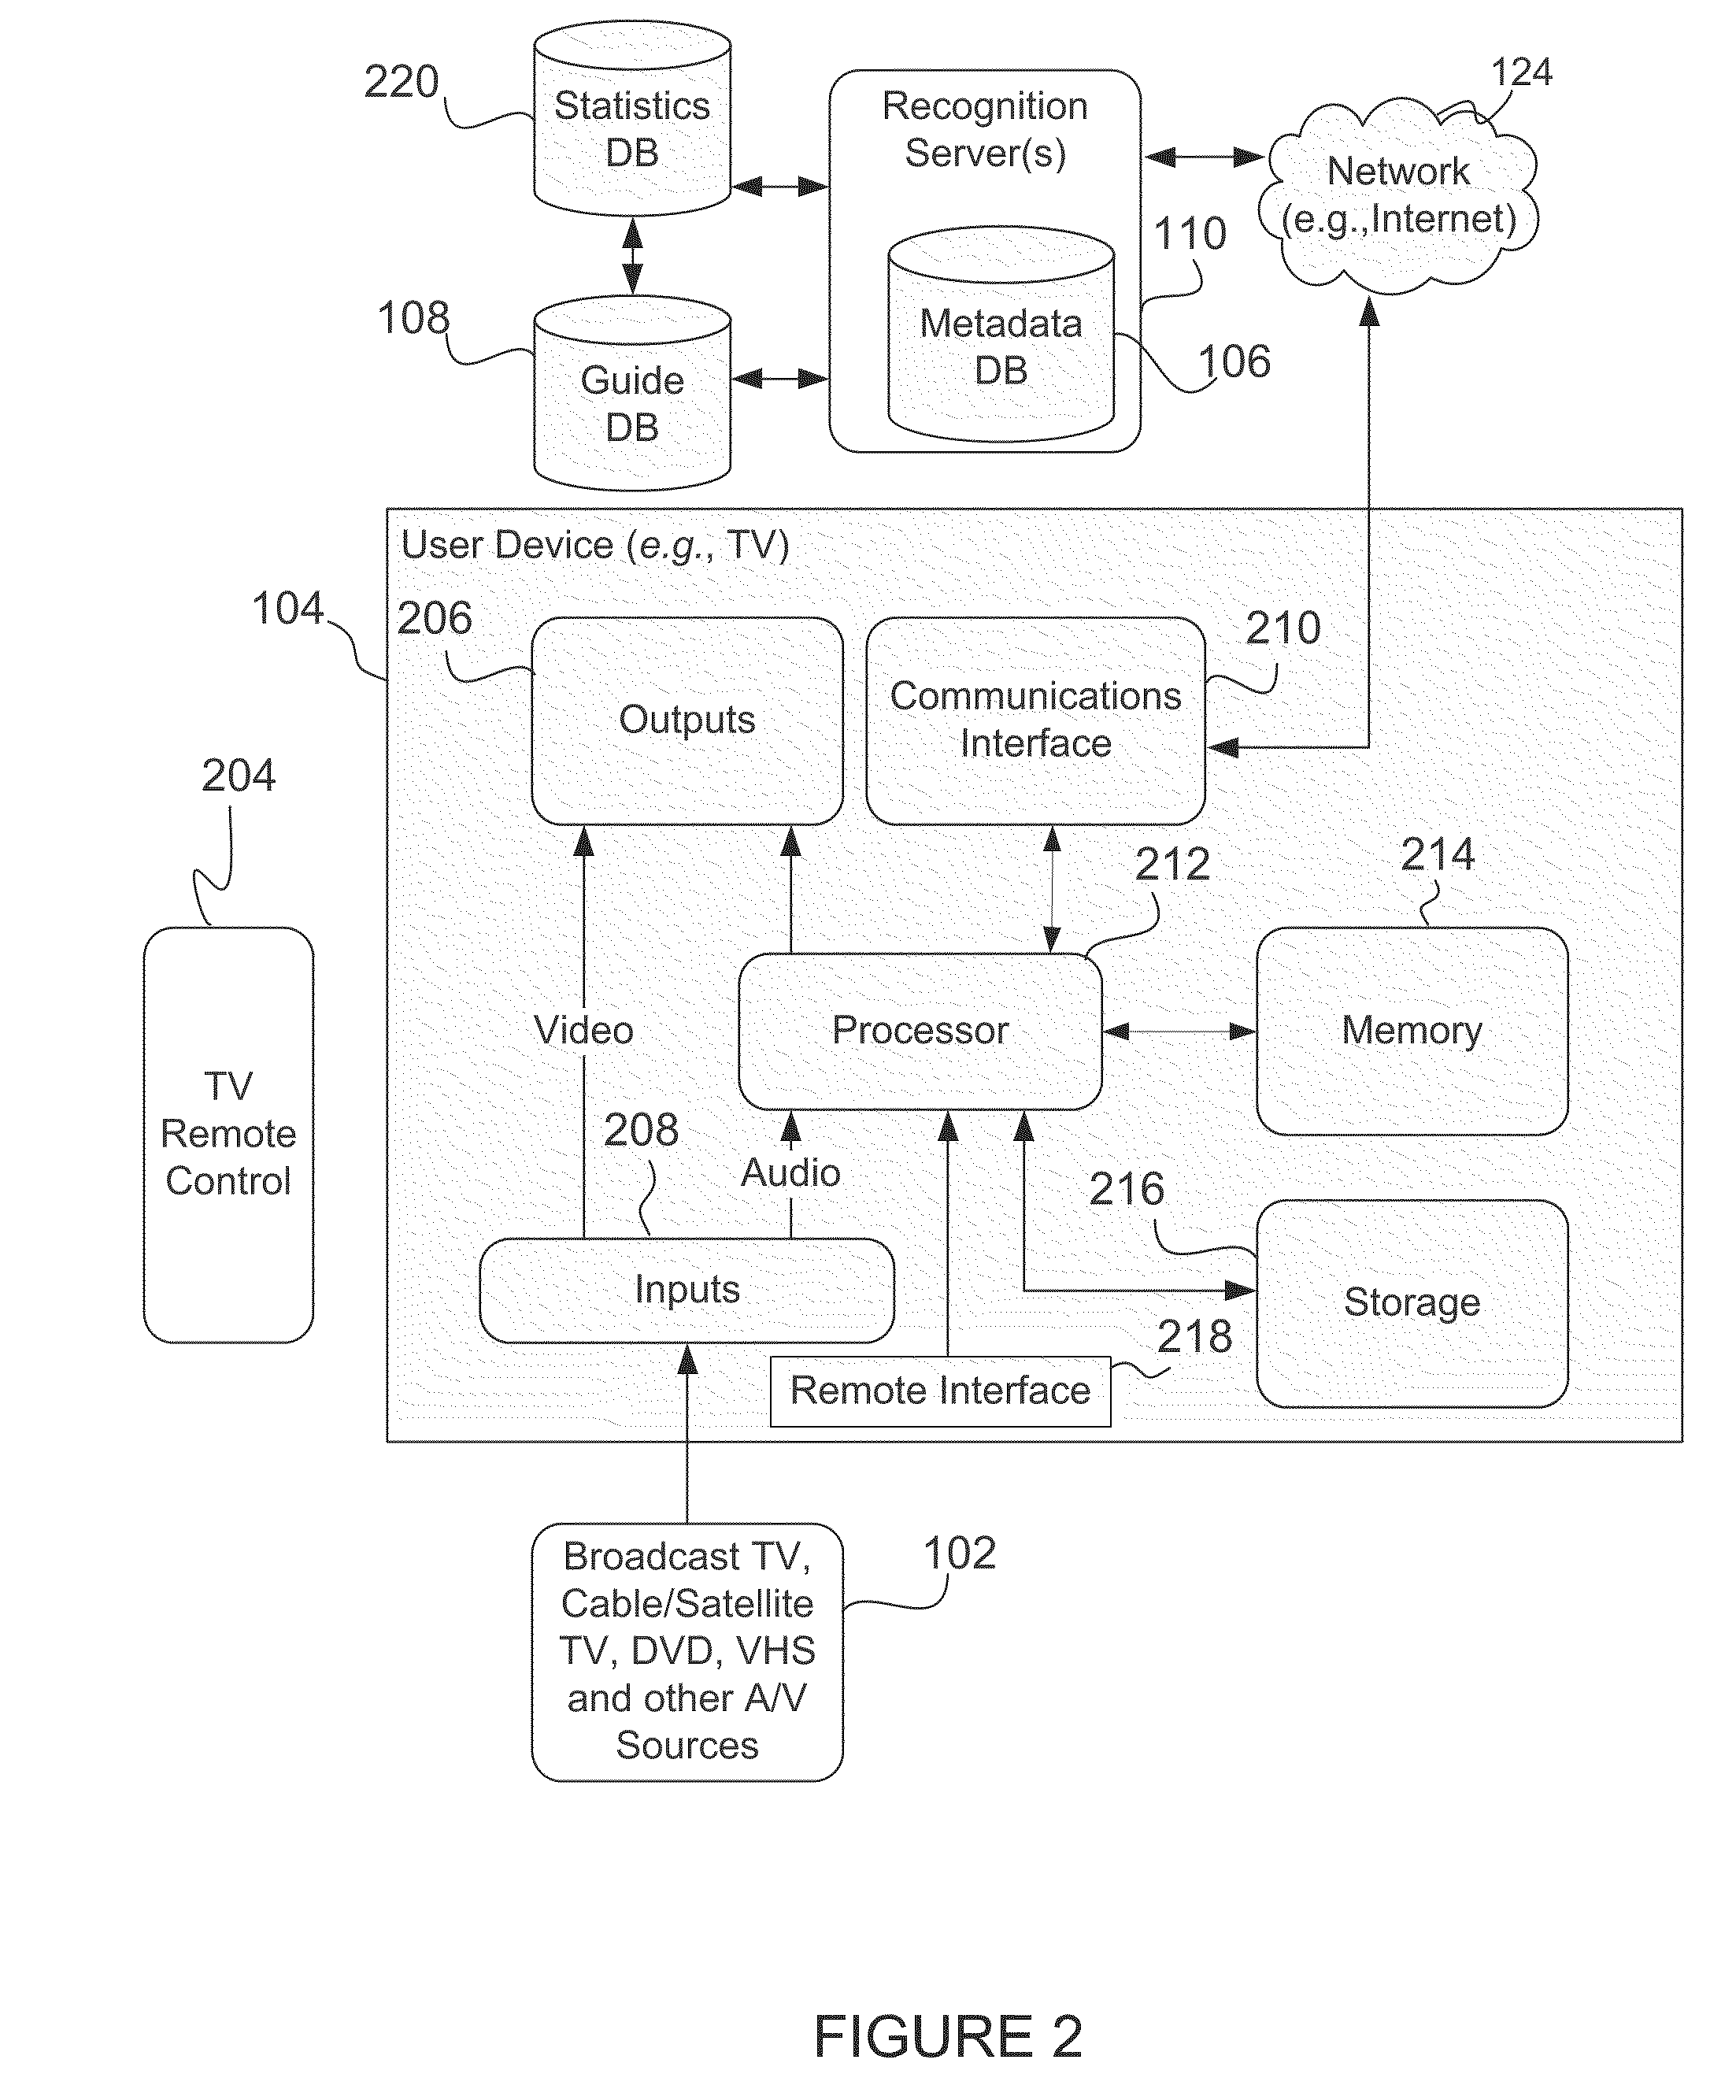 Content Recognition and Synchronization on a Television or Consumer Electronics Device